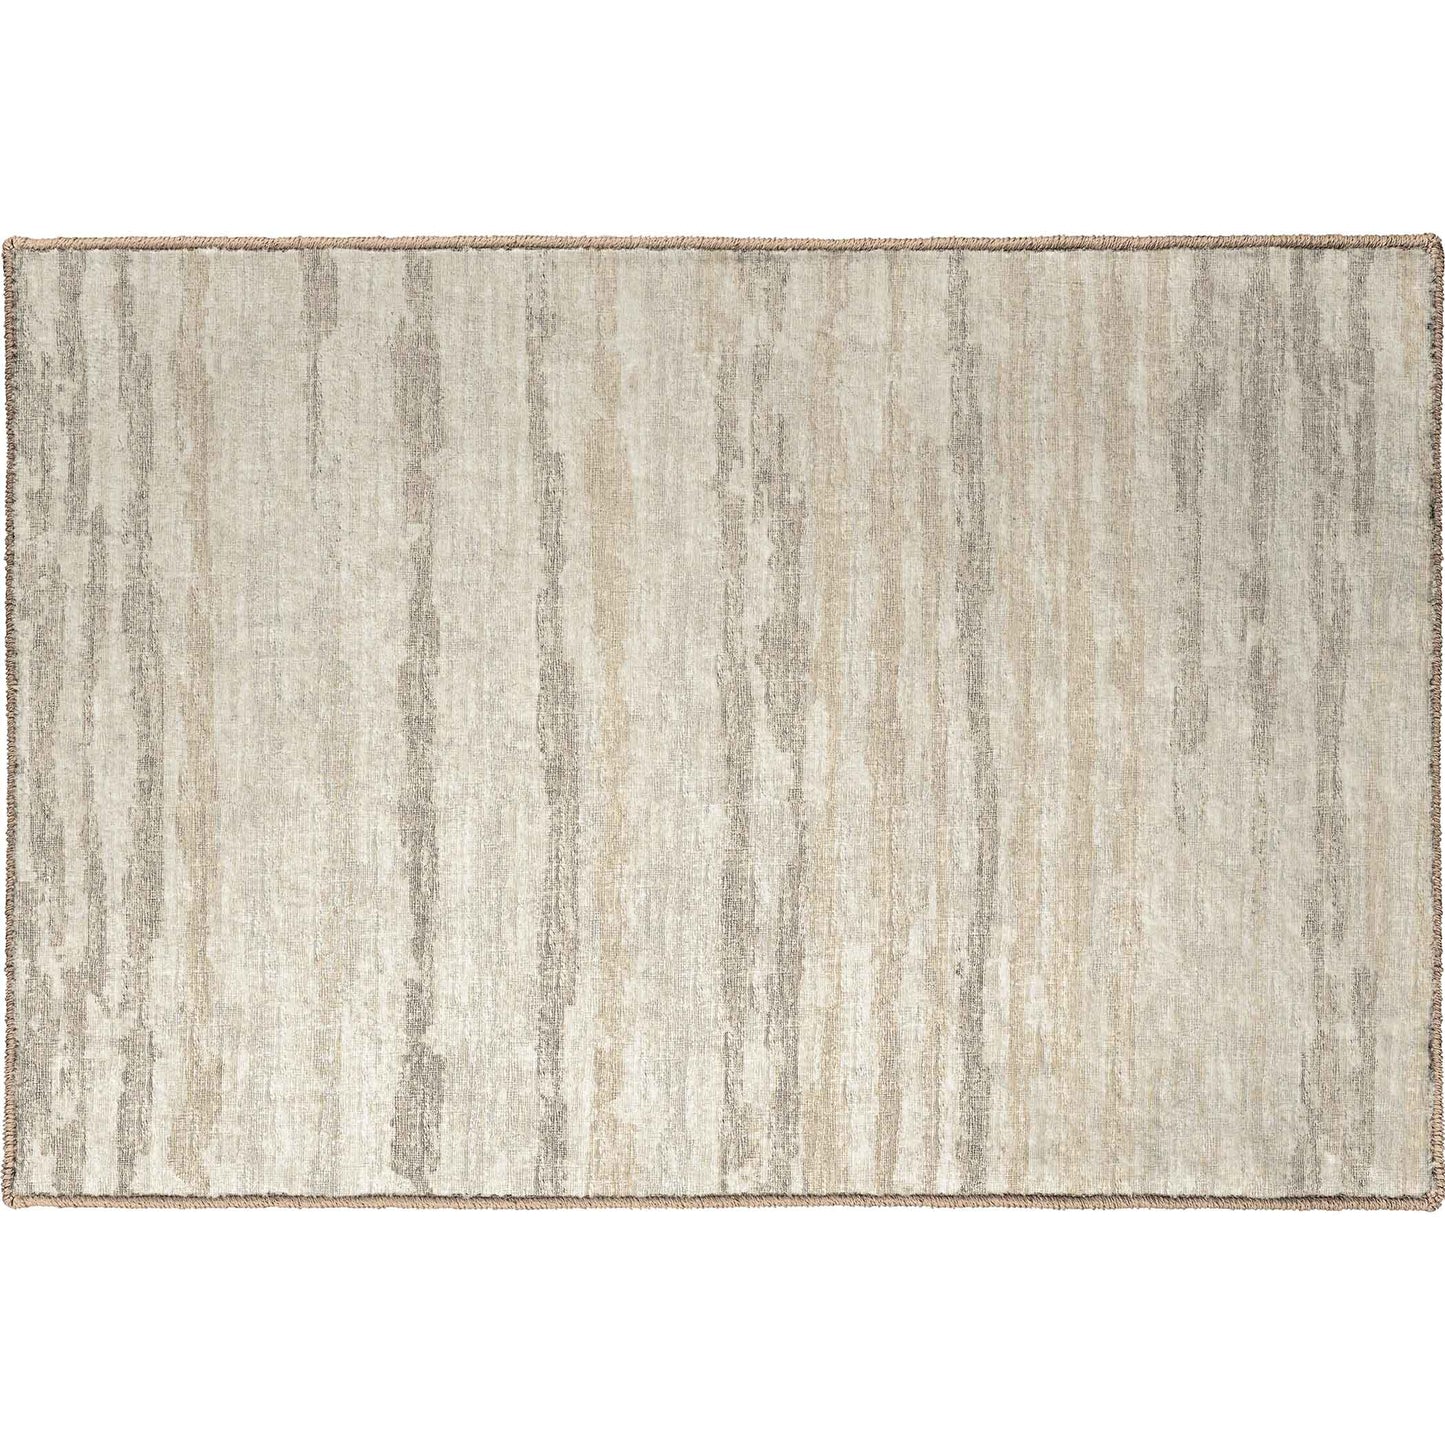 Dalyn Rugs Brisbane BR4 Linen  Contemporary Machinemade Rug